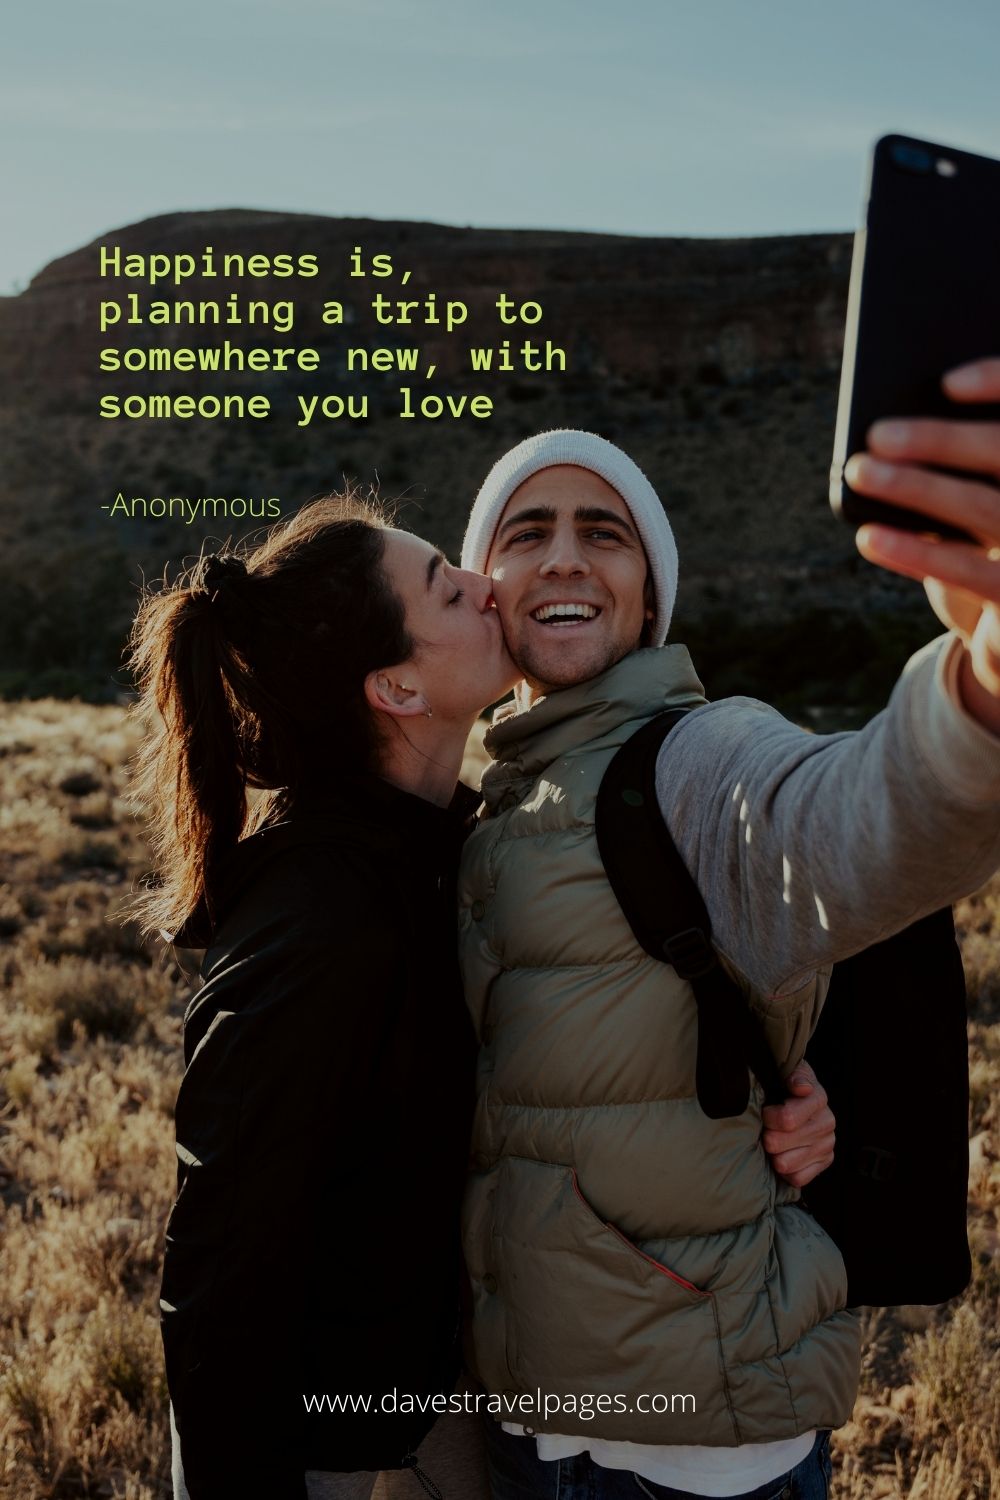 Couples Adventure Quotes: Happiness is, planning a trip to somewhere new, with someone you love